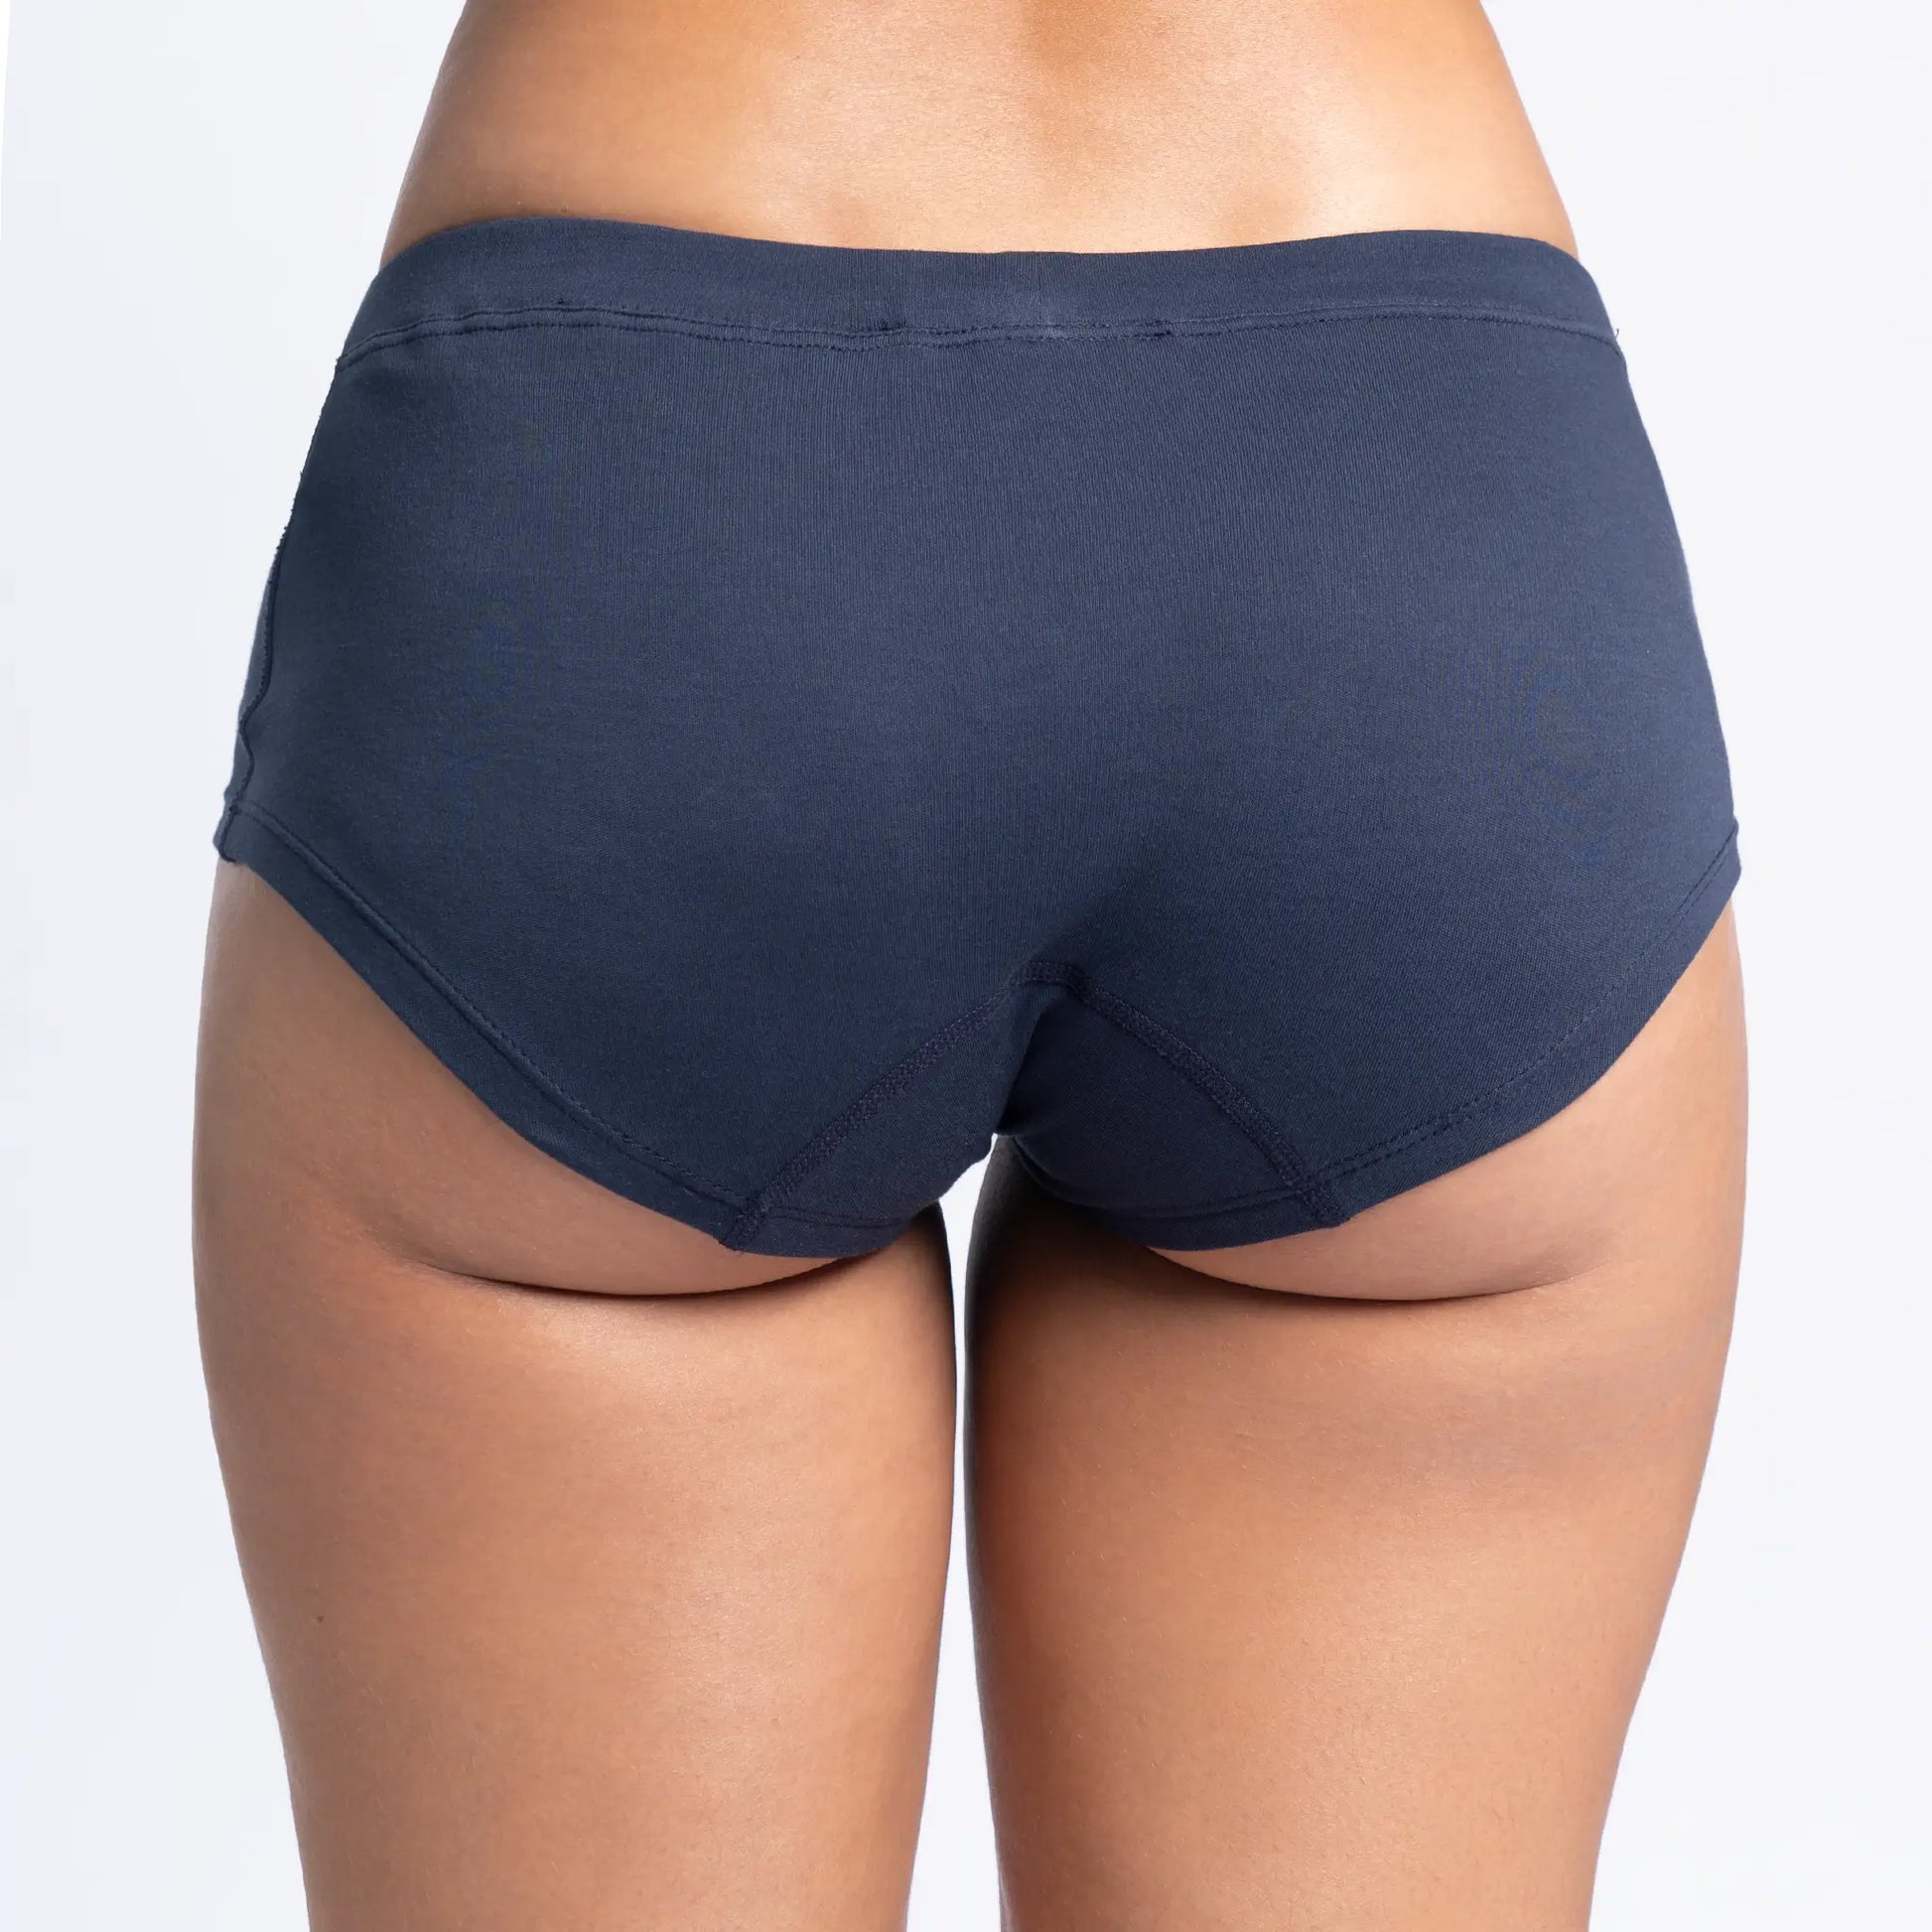 womens all natural panties color navy blue